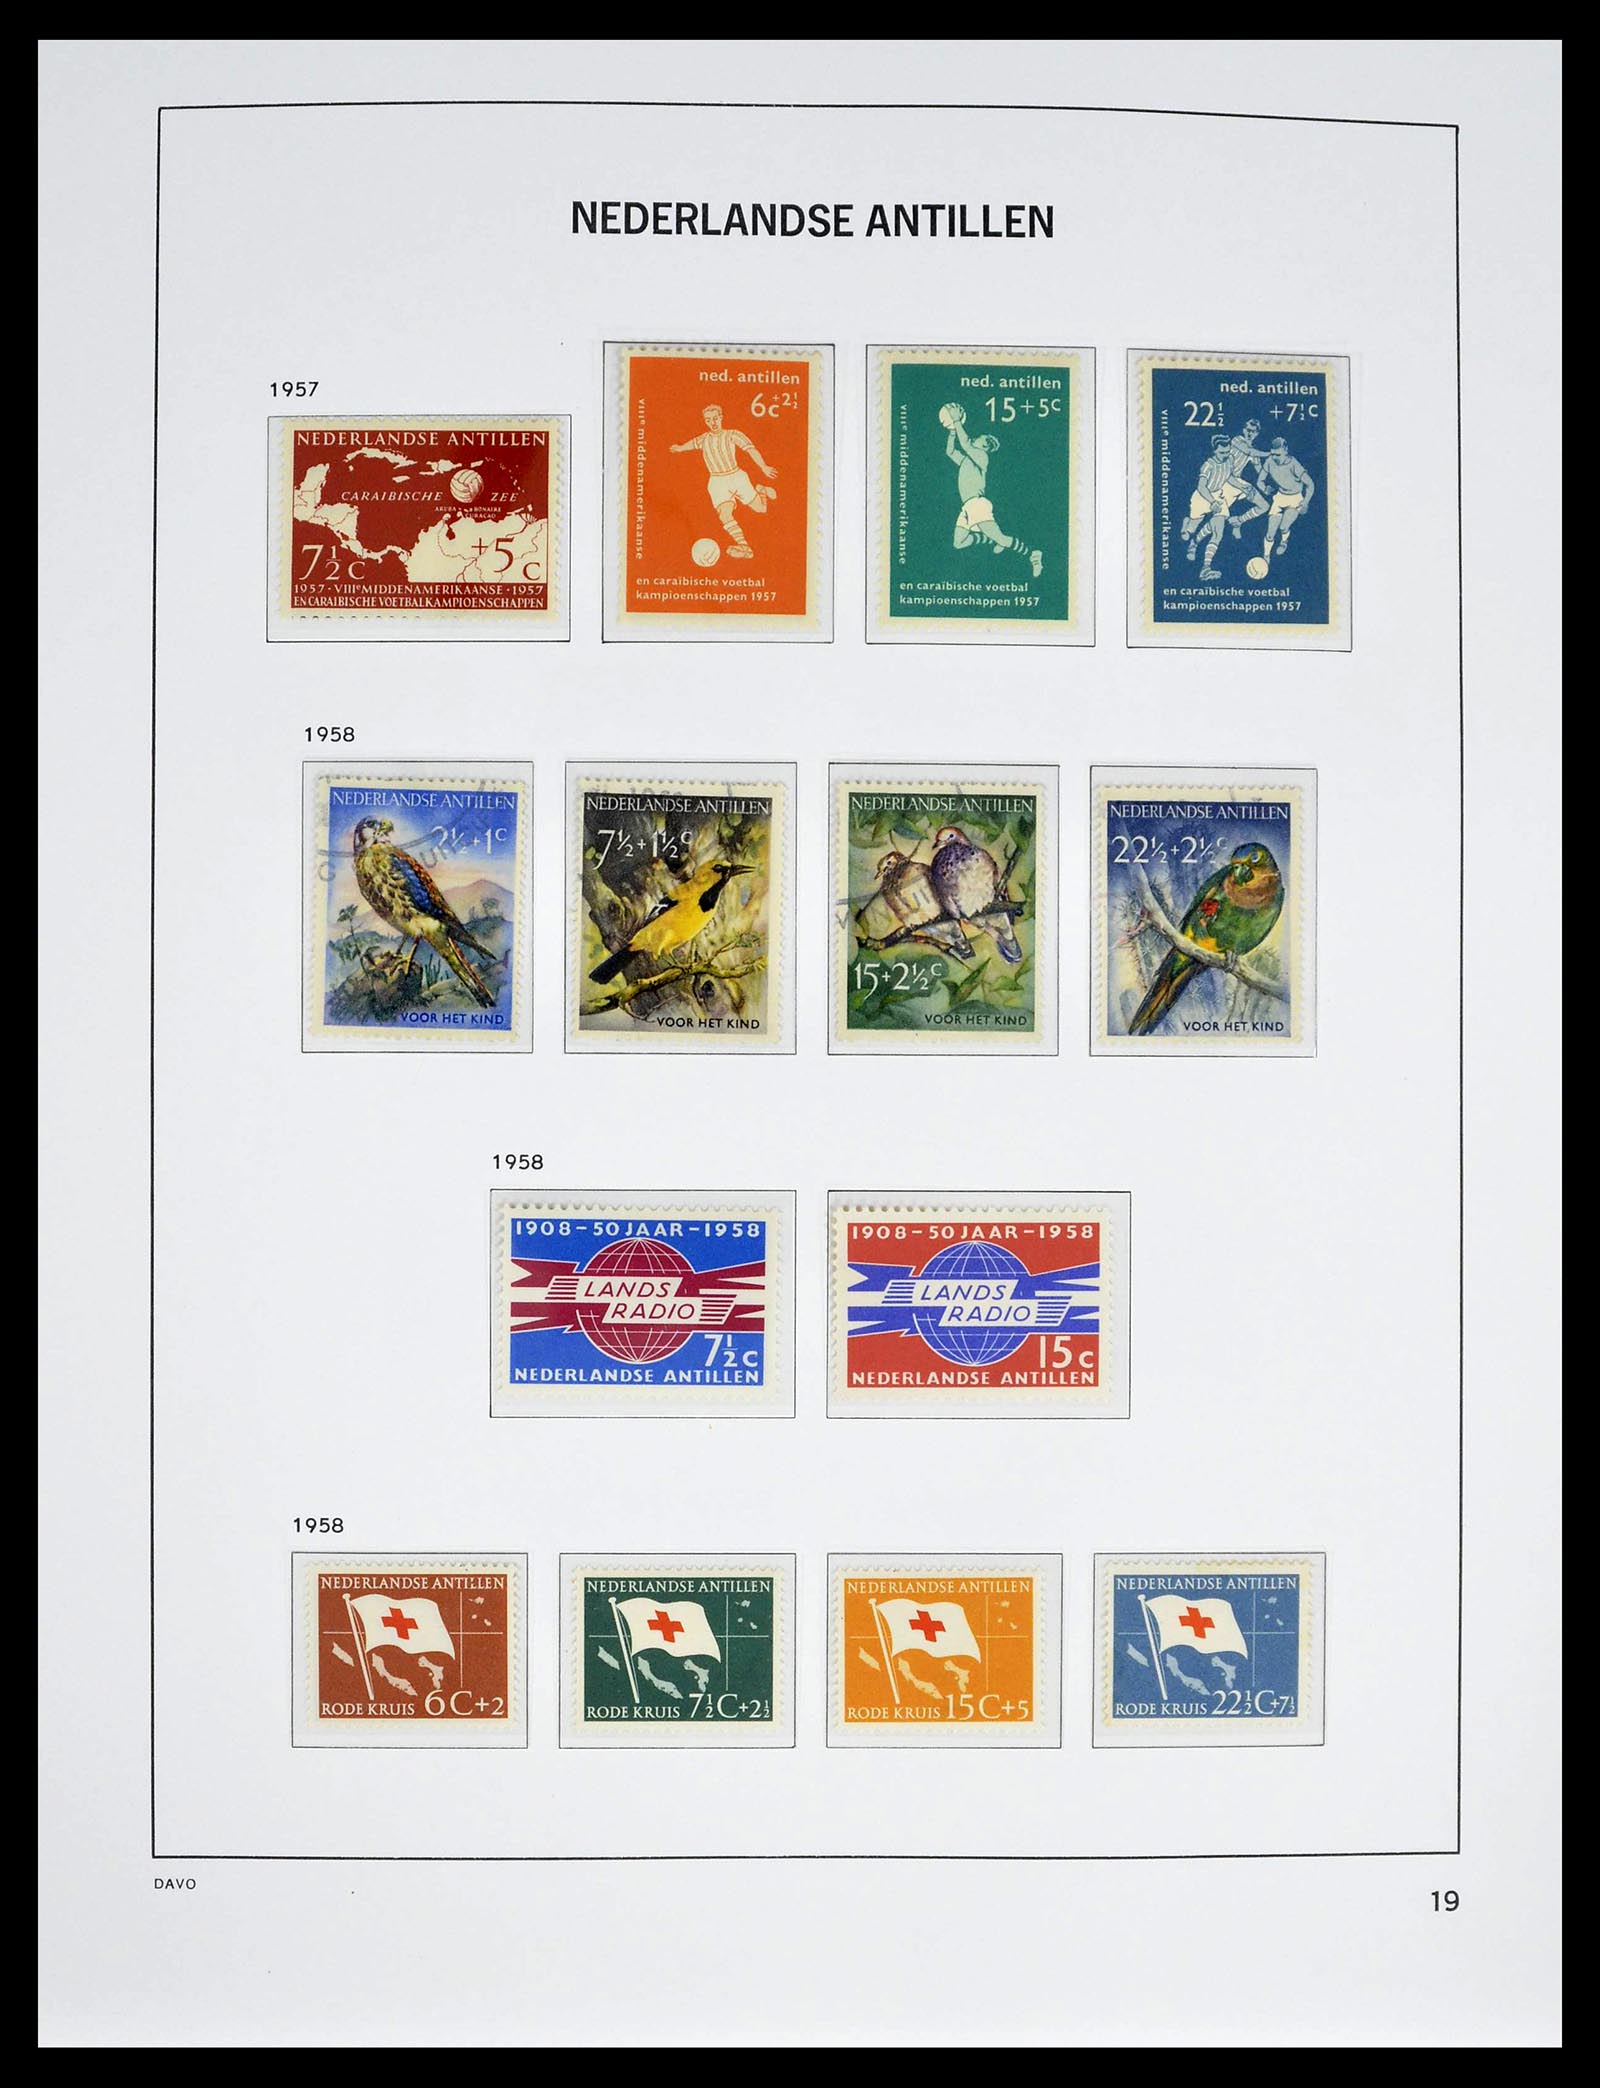 39360 0019 - Stamp collection 39360 Curaçao/Antilles complete 1873-2013.